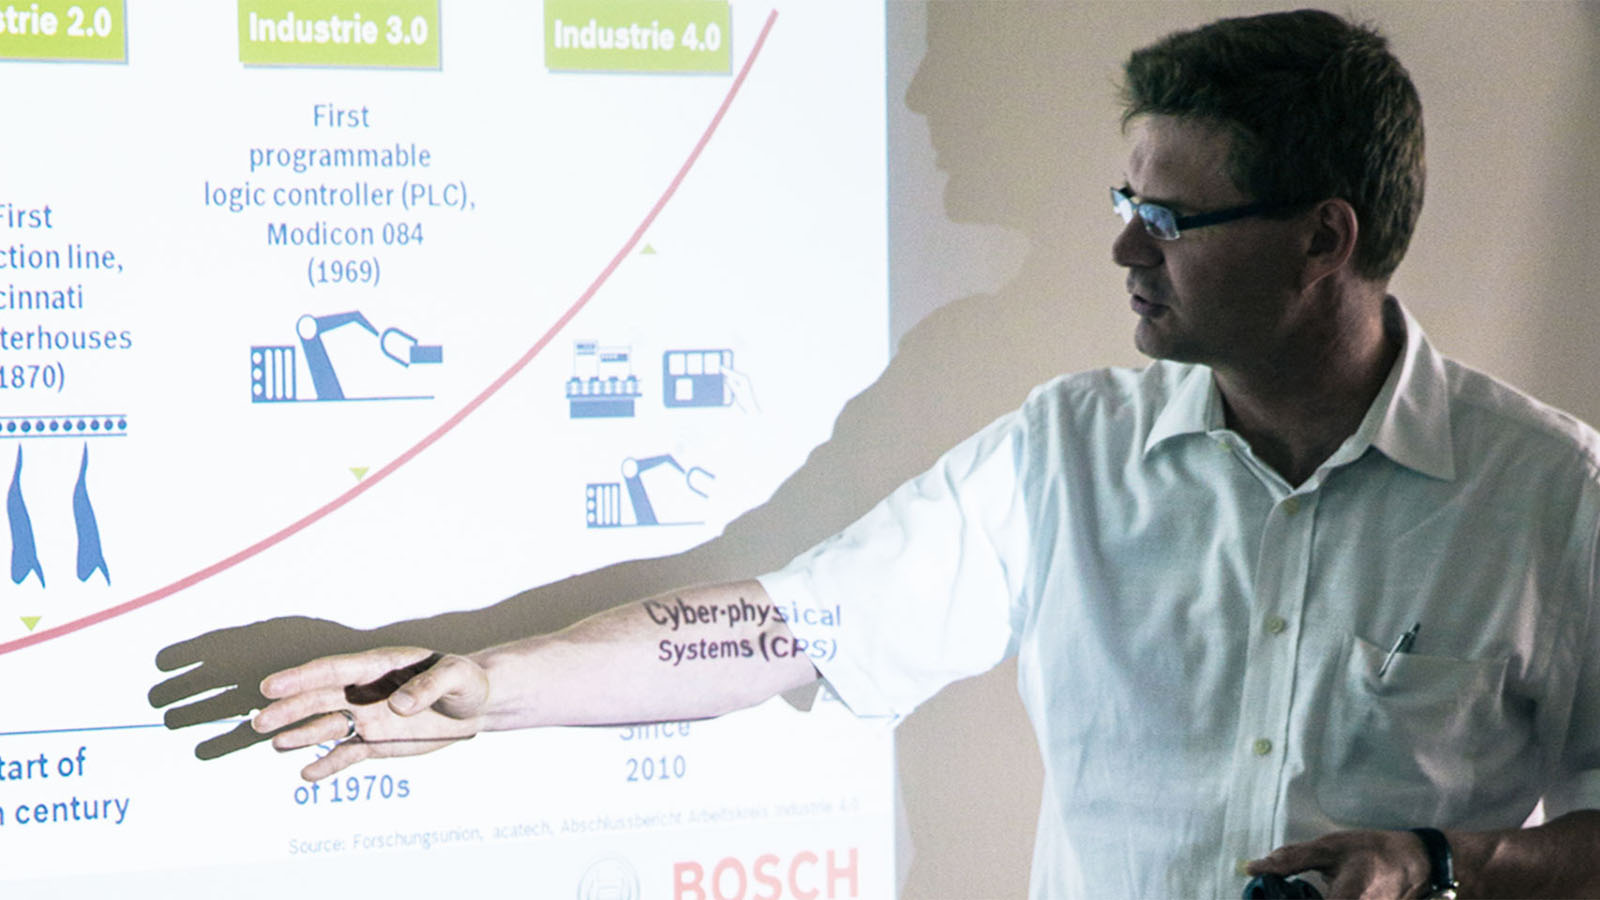 Lab Talk: Dr. Stefan Ferber gave us a lecture about Industry 4.0